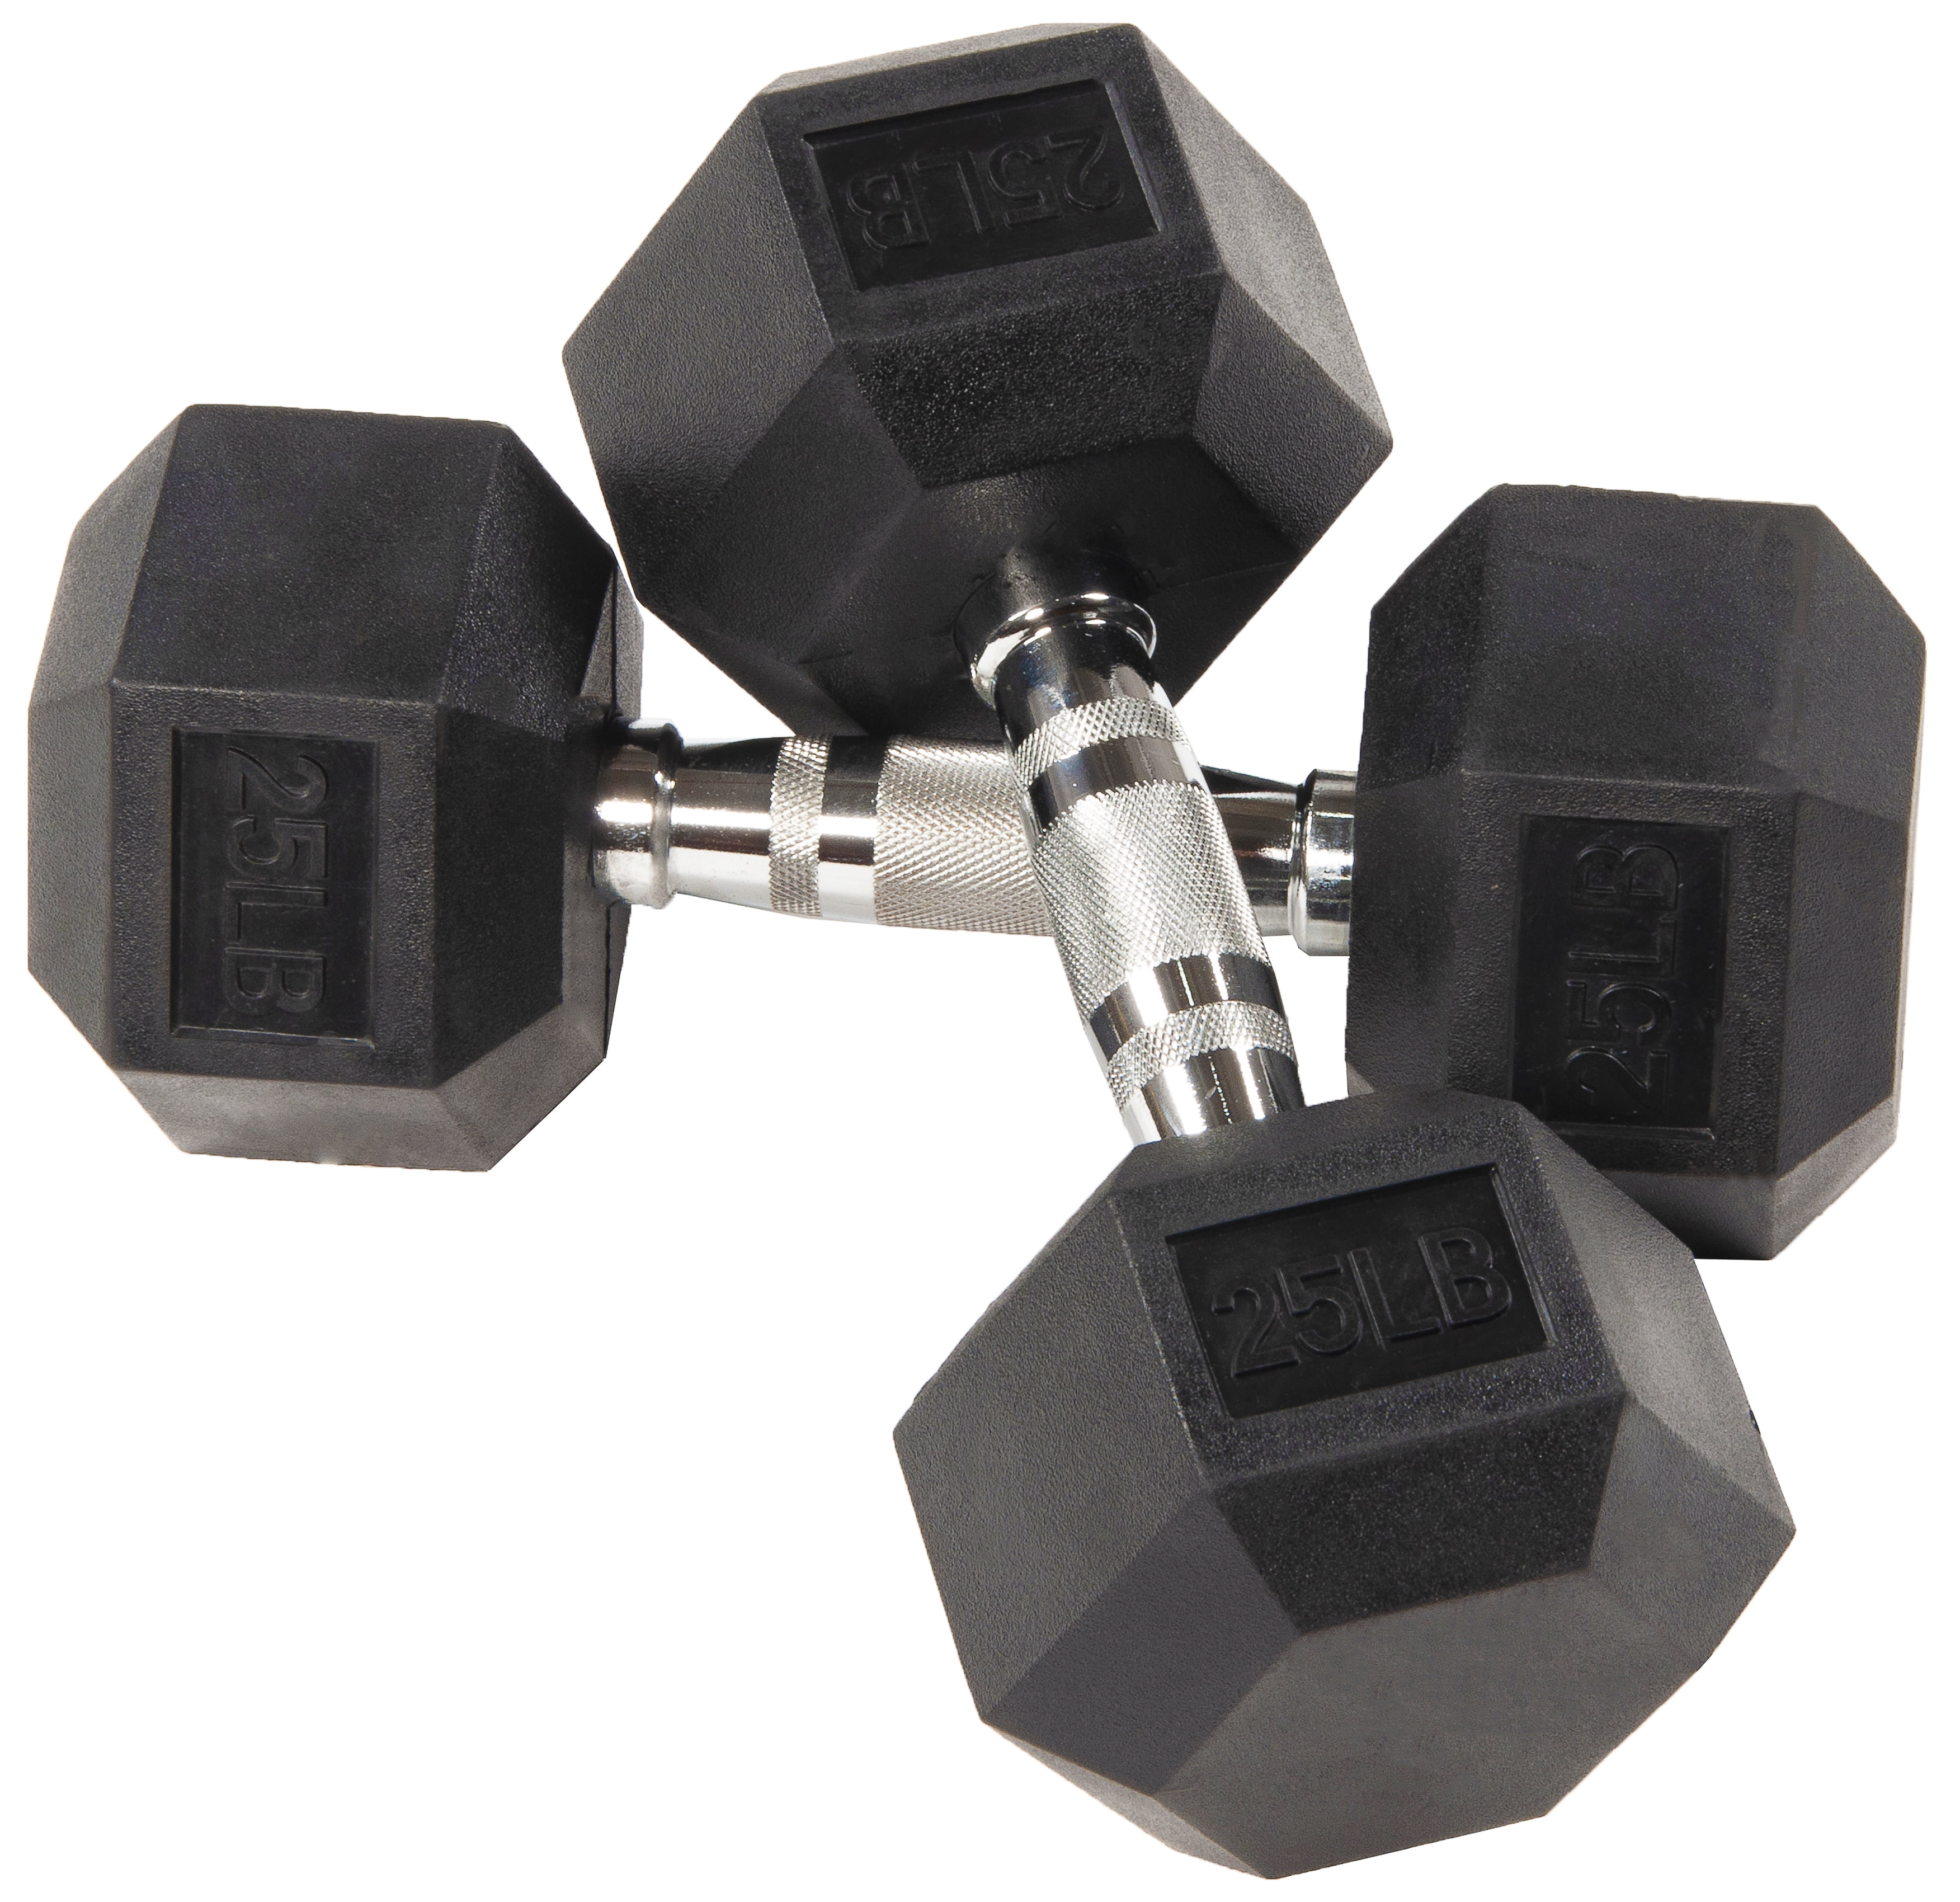 DRH25 Rubber Hex Dumbbell 25 LBS Gym SINGLE NEW FREE SHIPPING WEIDER 